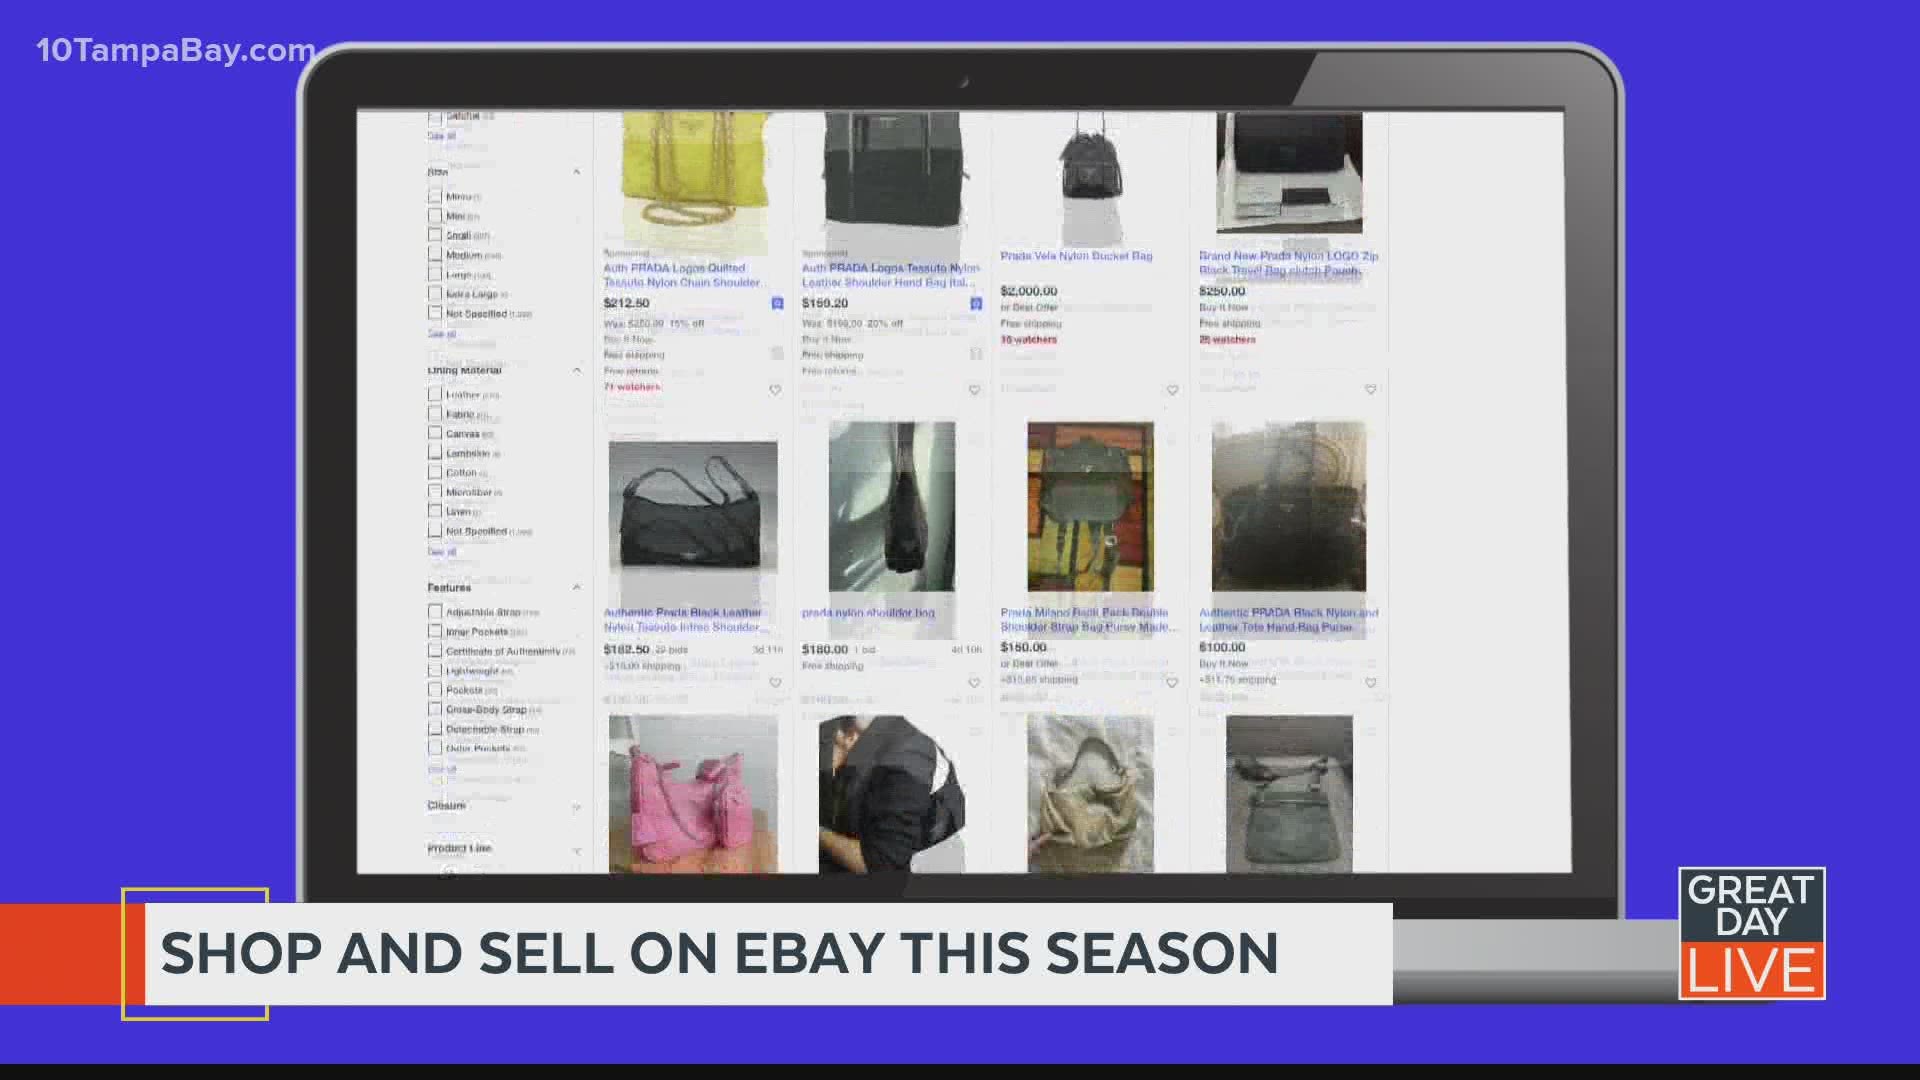 Paid content sponsored by Ebay